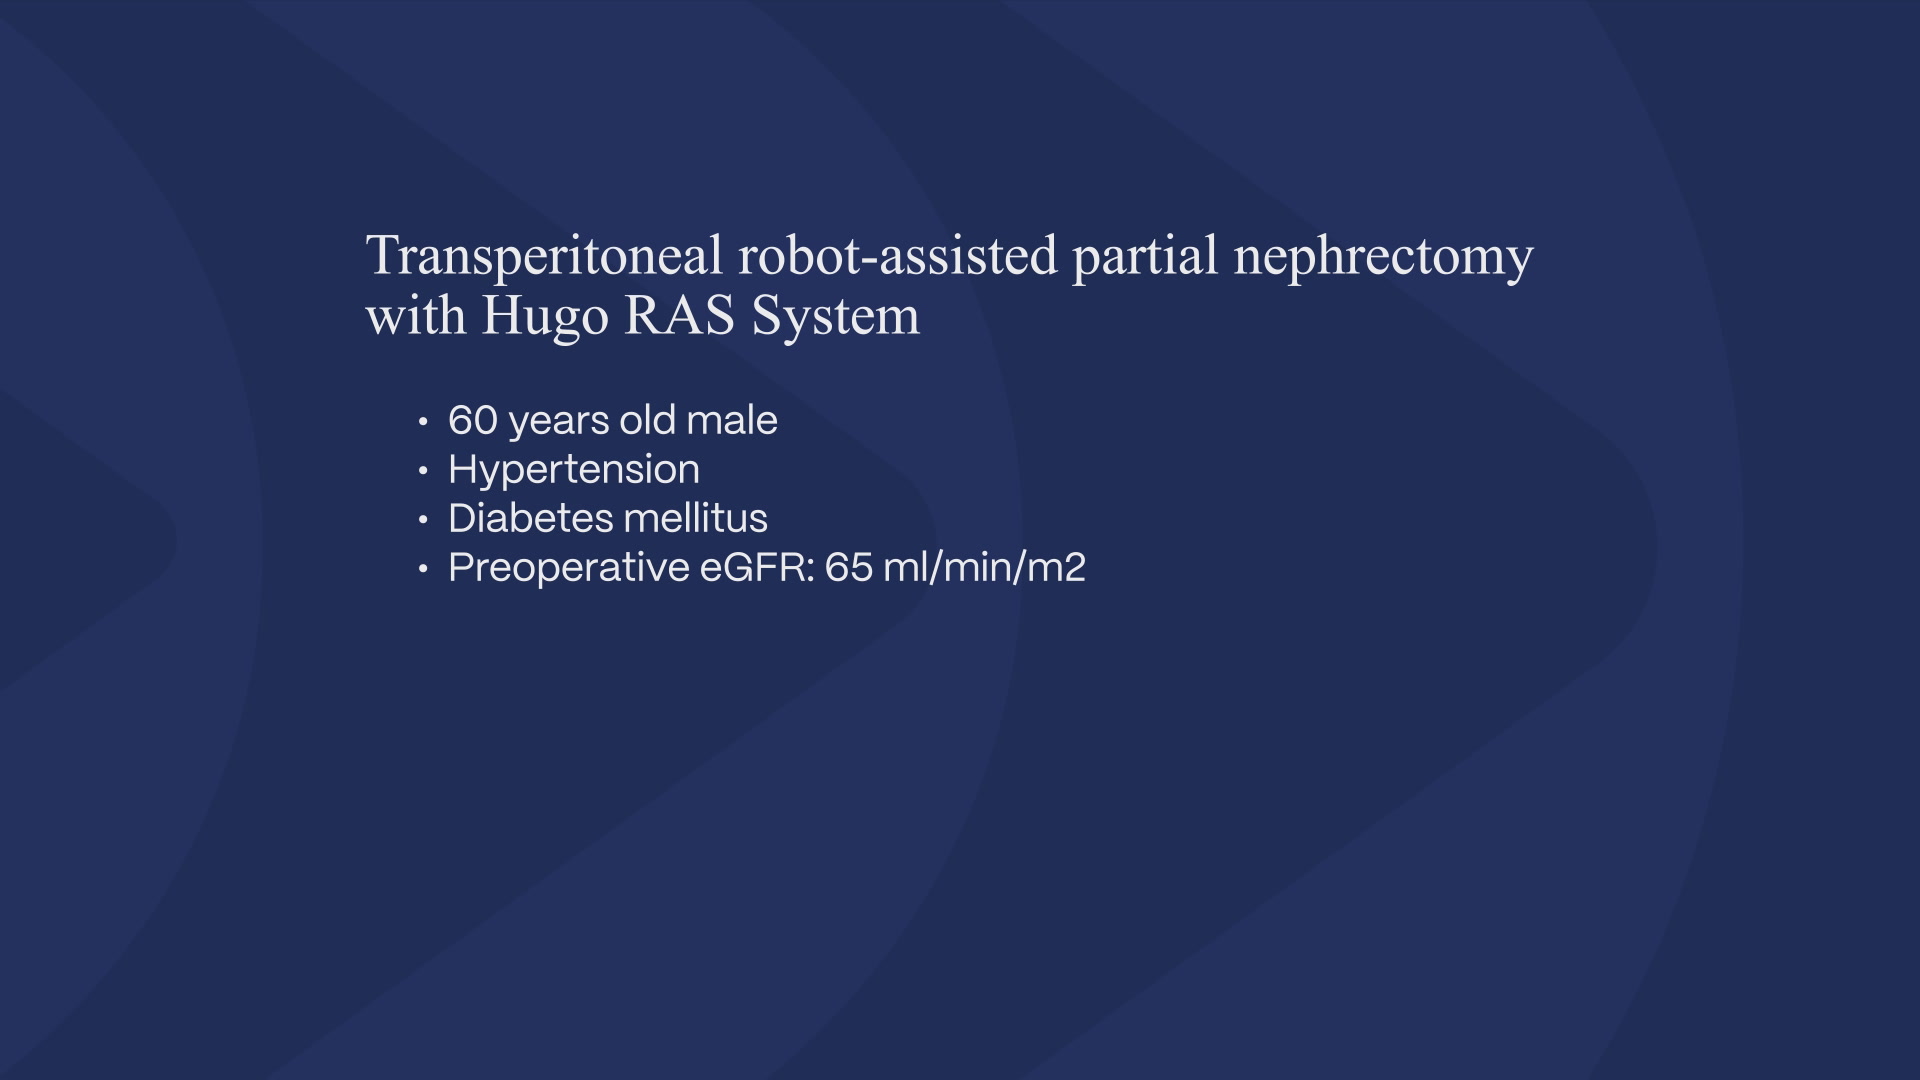 Transperitoneal Robot-Assisted Partial Nephrectomy